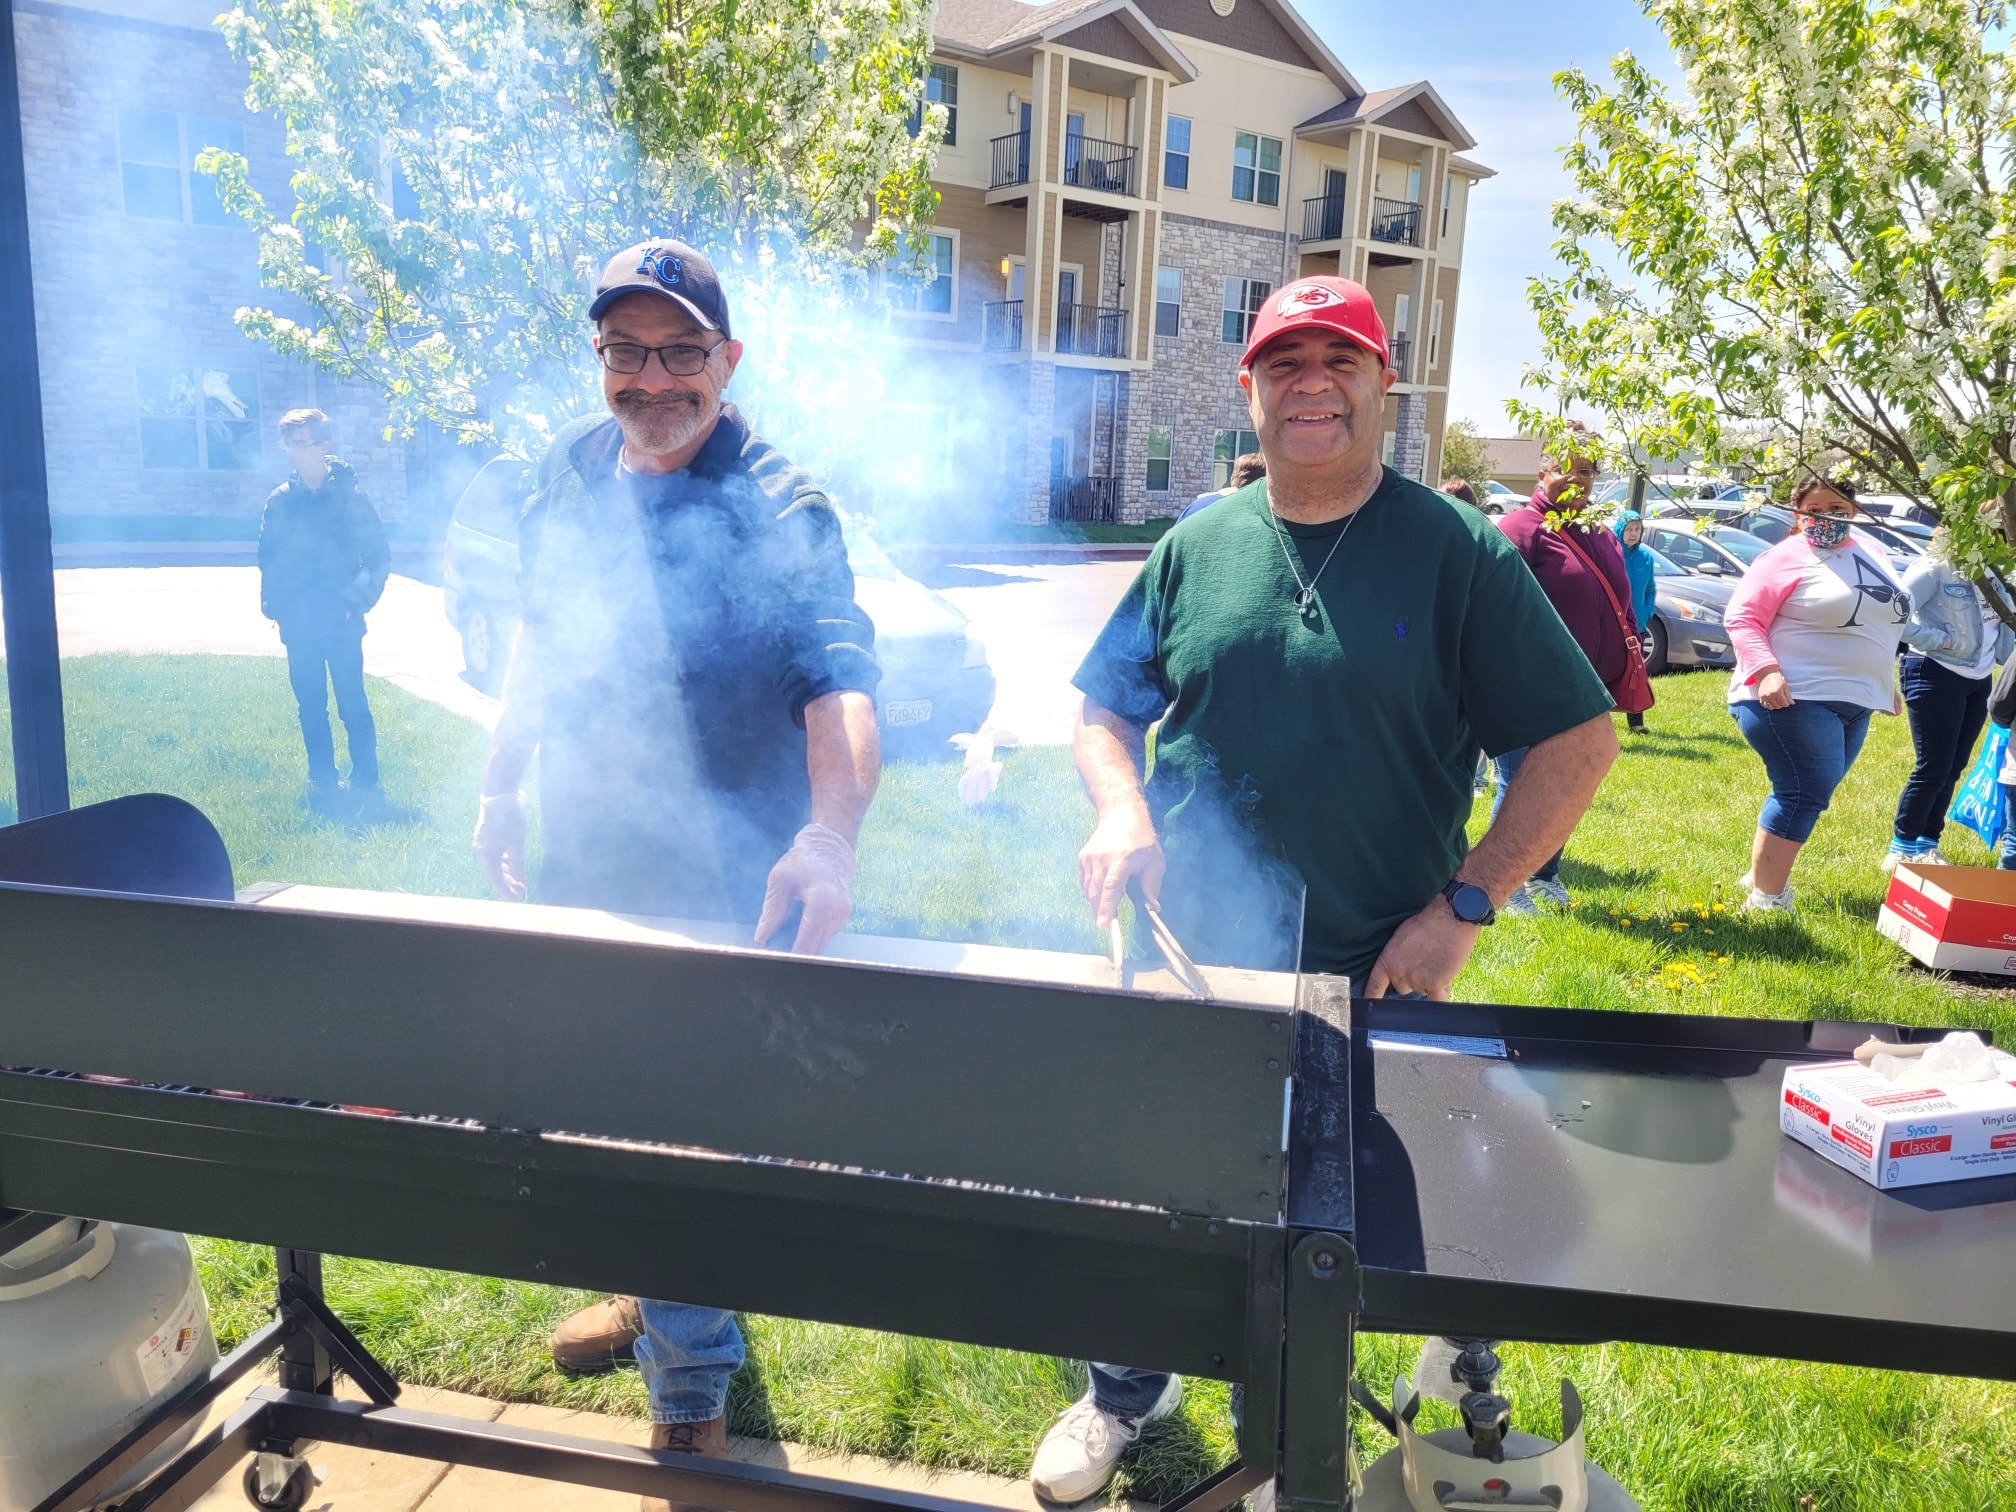 Grilling at The Parkway Senior Living in Blue Springs, MO